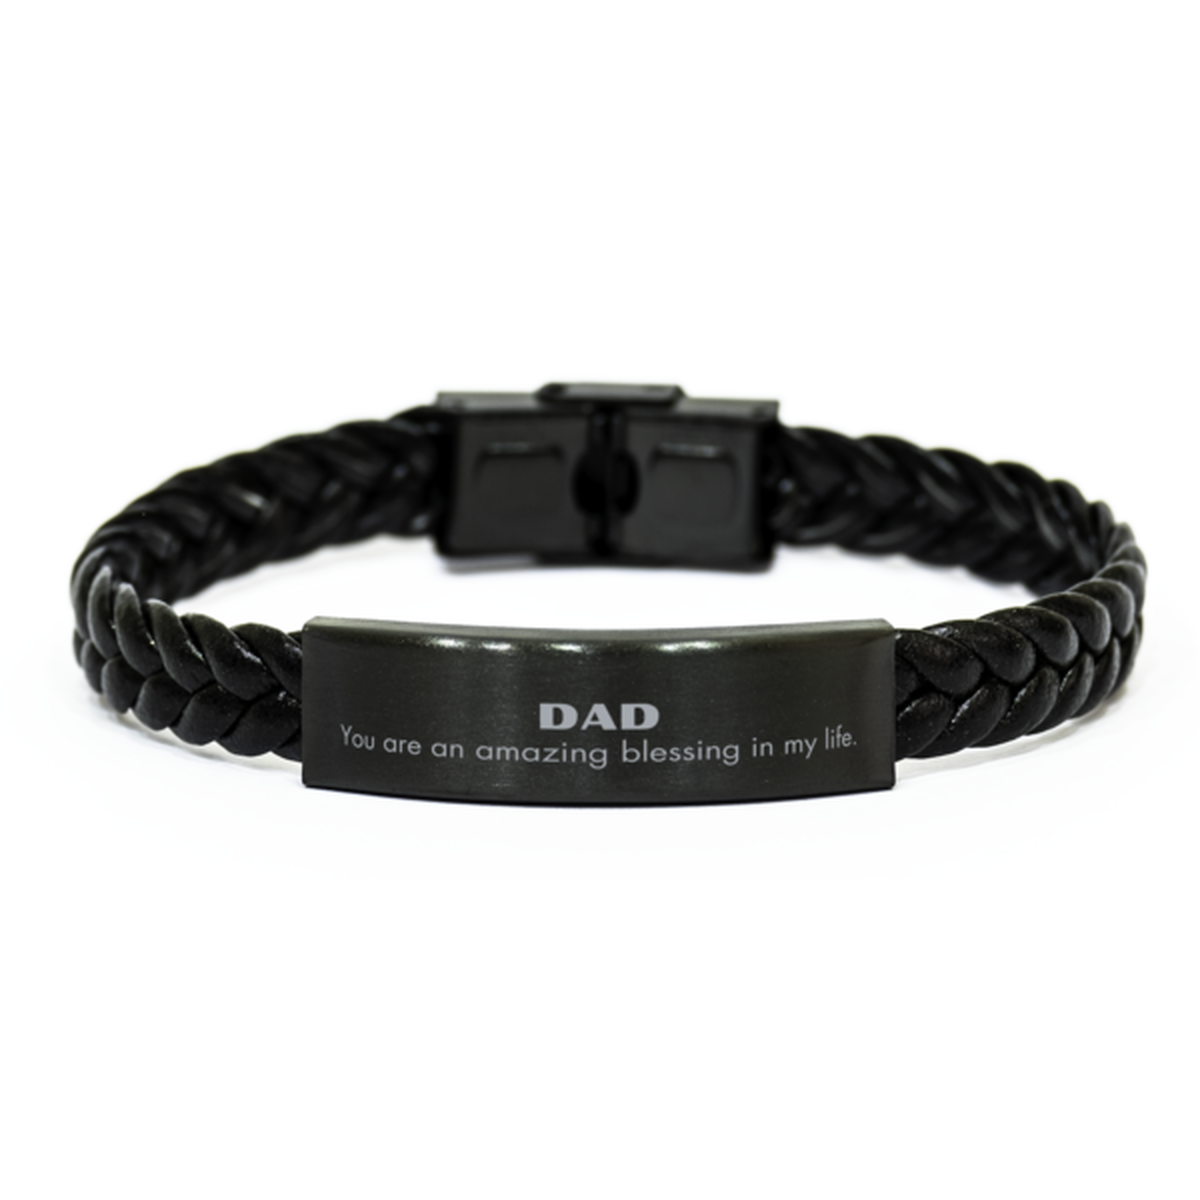 Dad Braided Leather Bracelet, You are an amazing blessing in my life, Thank You Gifts For Dad, Inspirational Birthday Christmas Unique Gifts For Dad